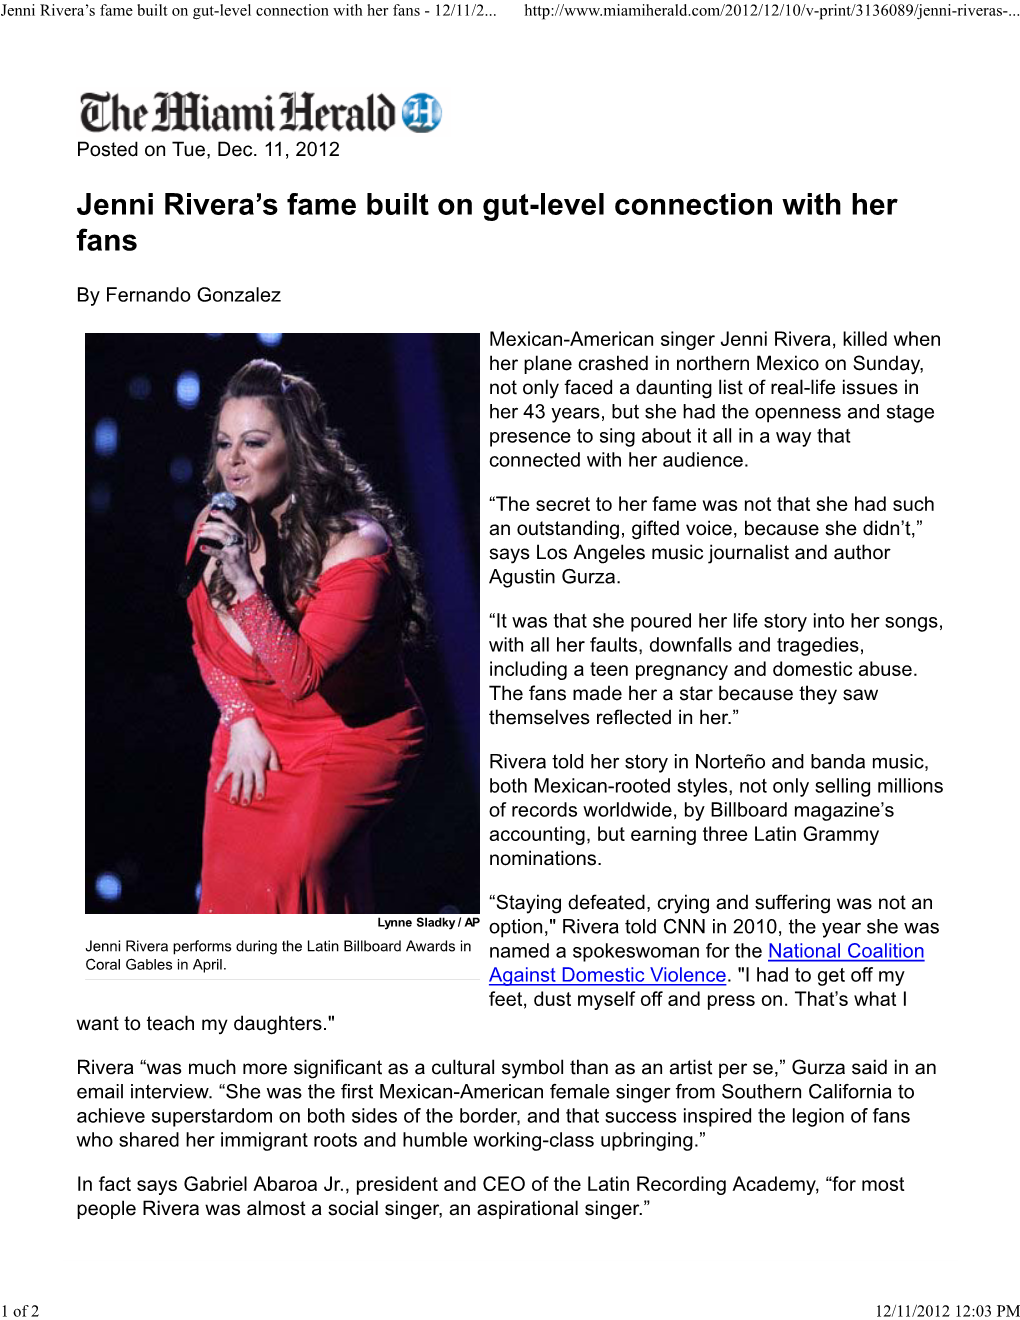 Jenni Rivera's Fame Built on Gut-Level Connection with Her Fans